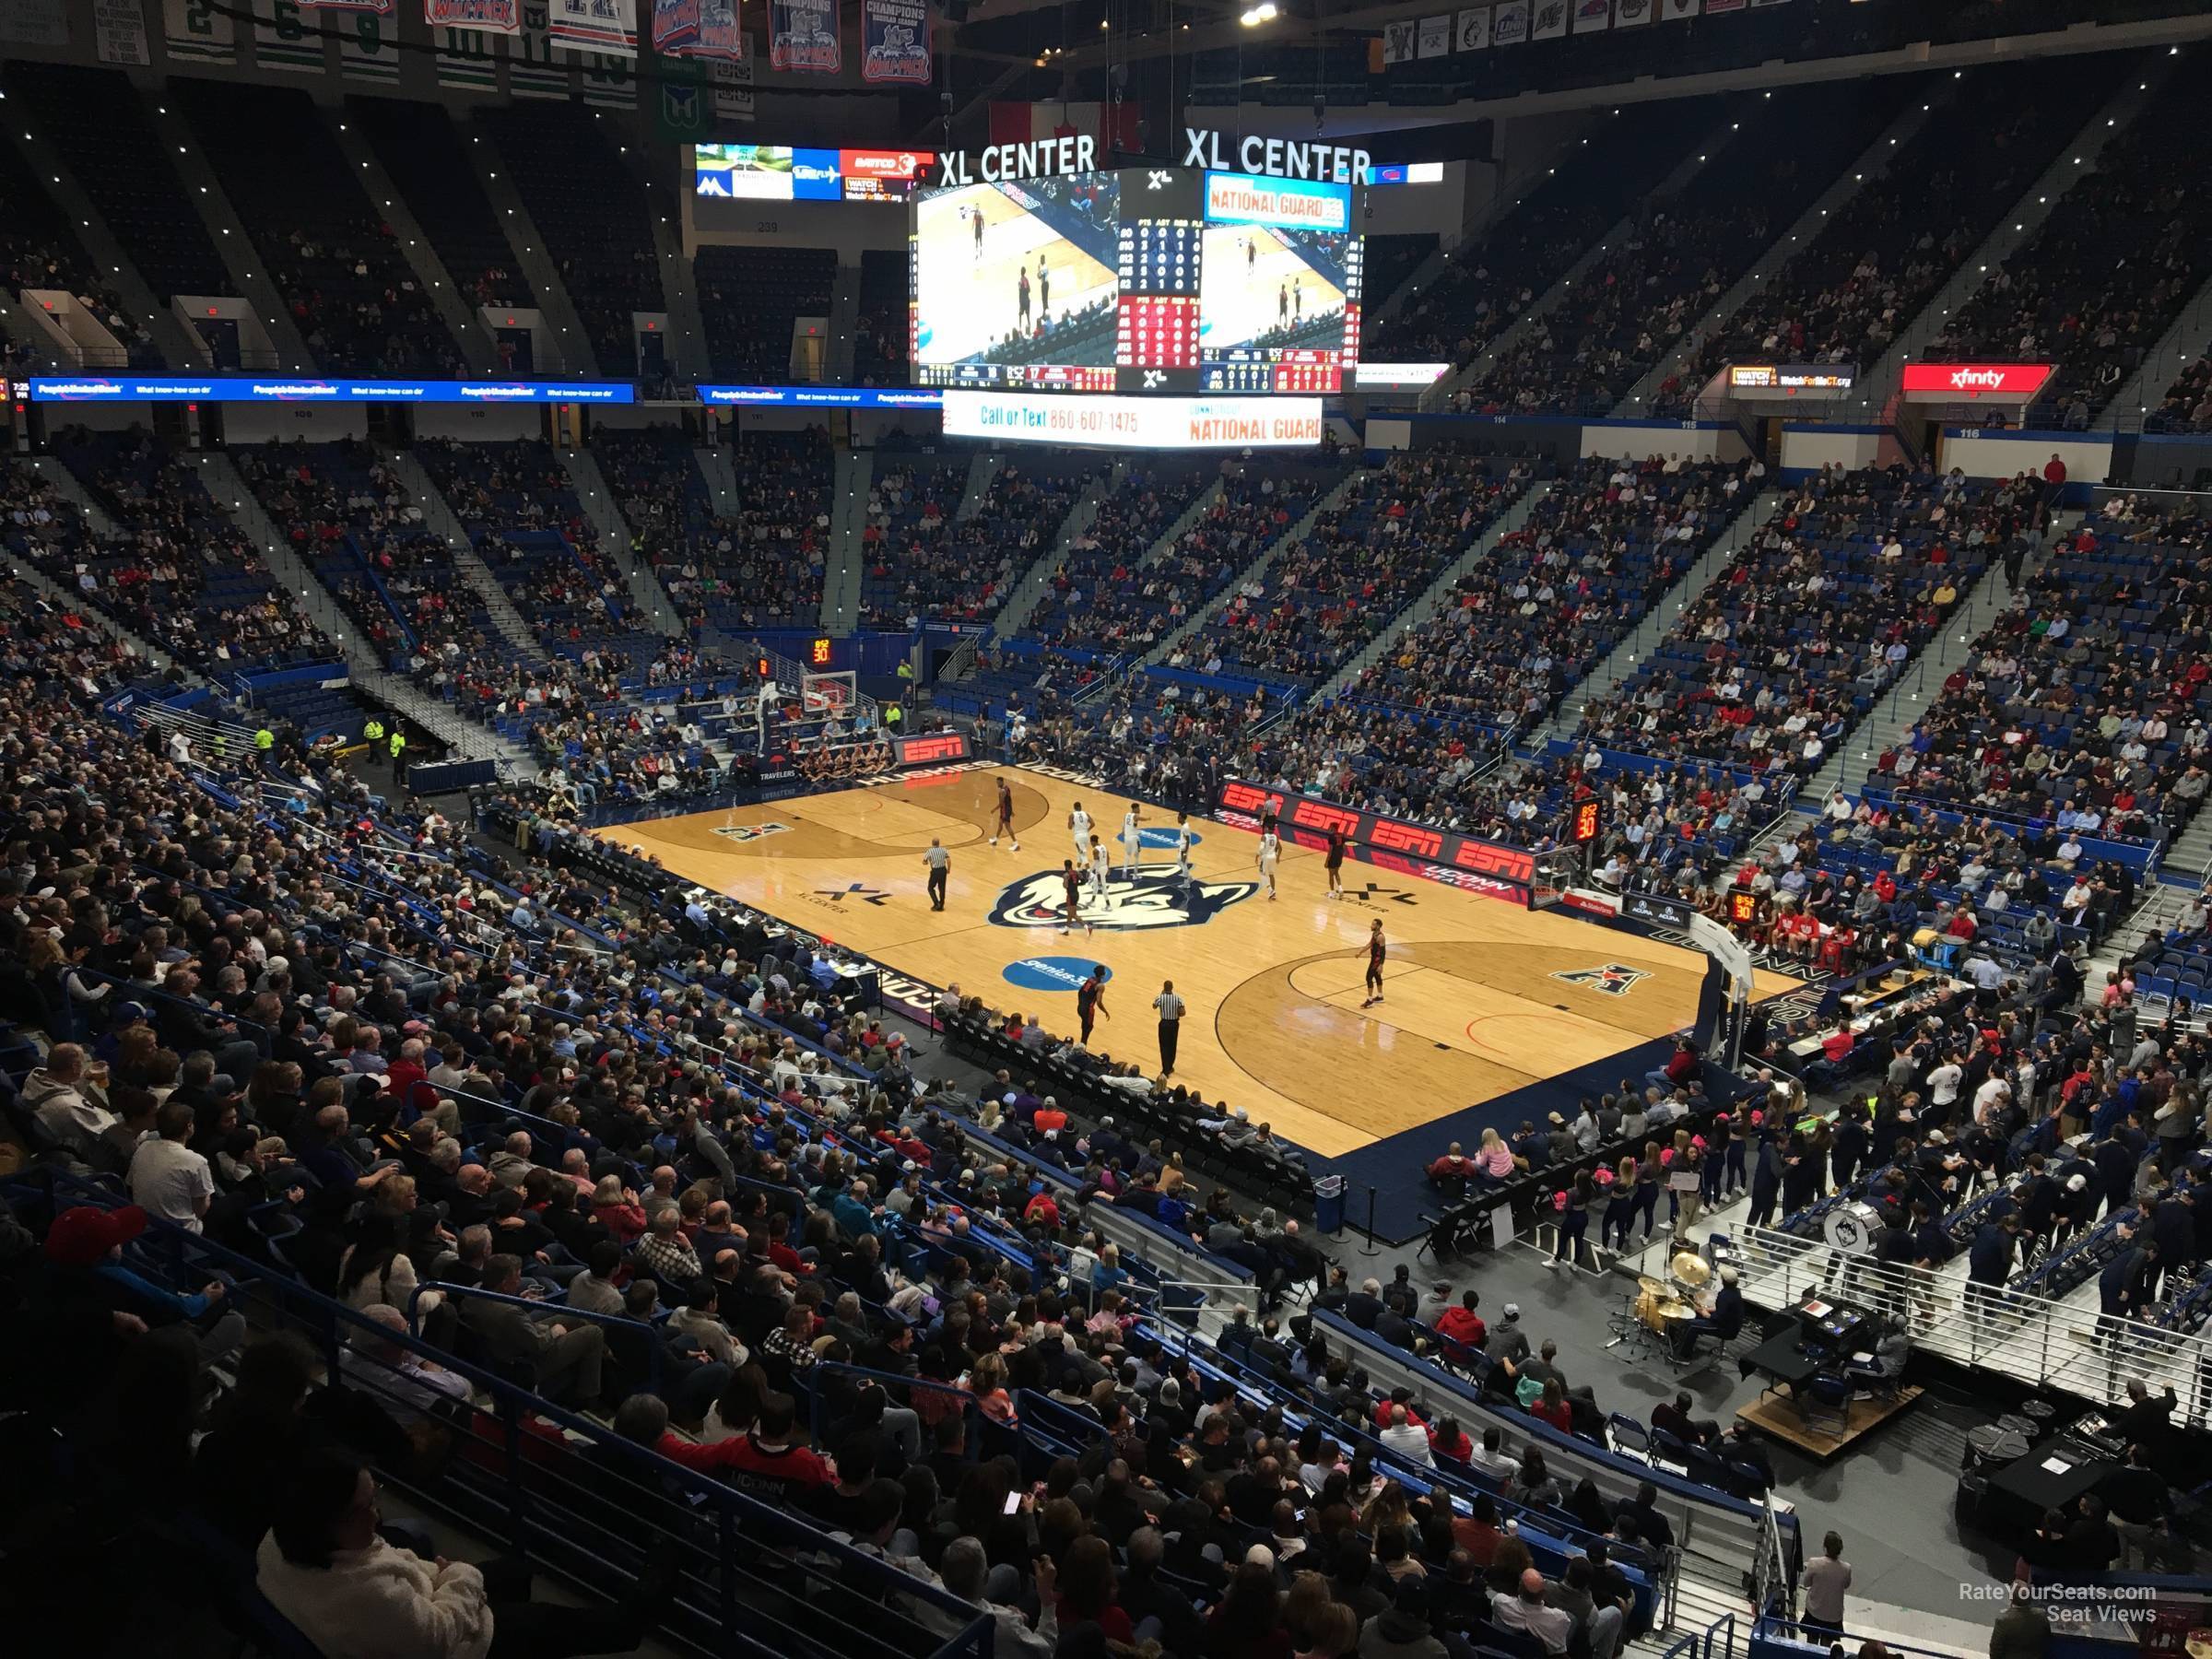 section 230, row a seat view  - xl center